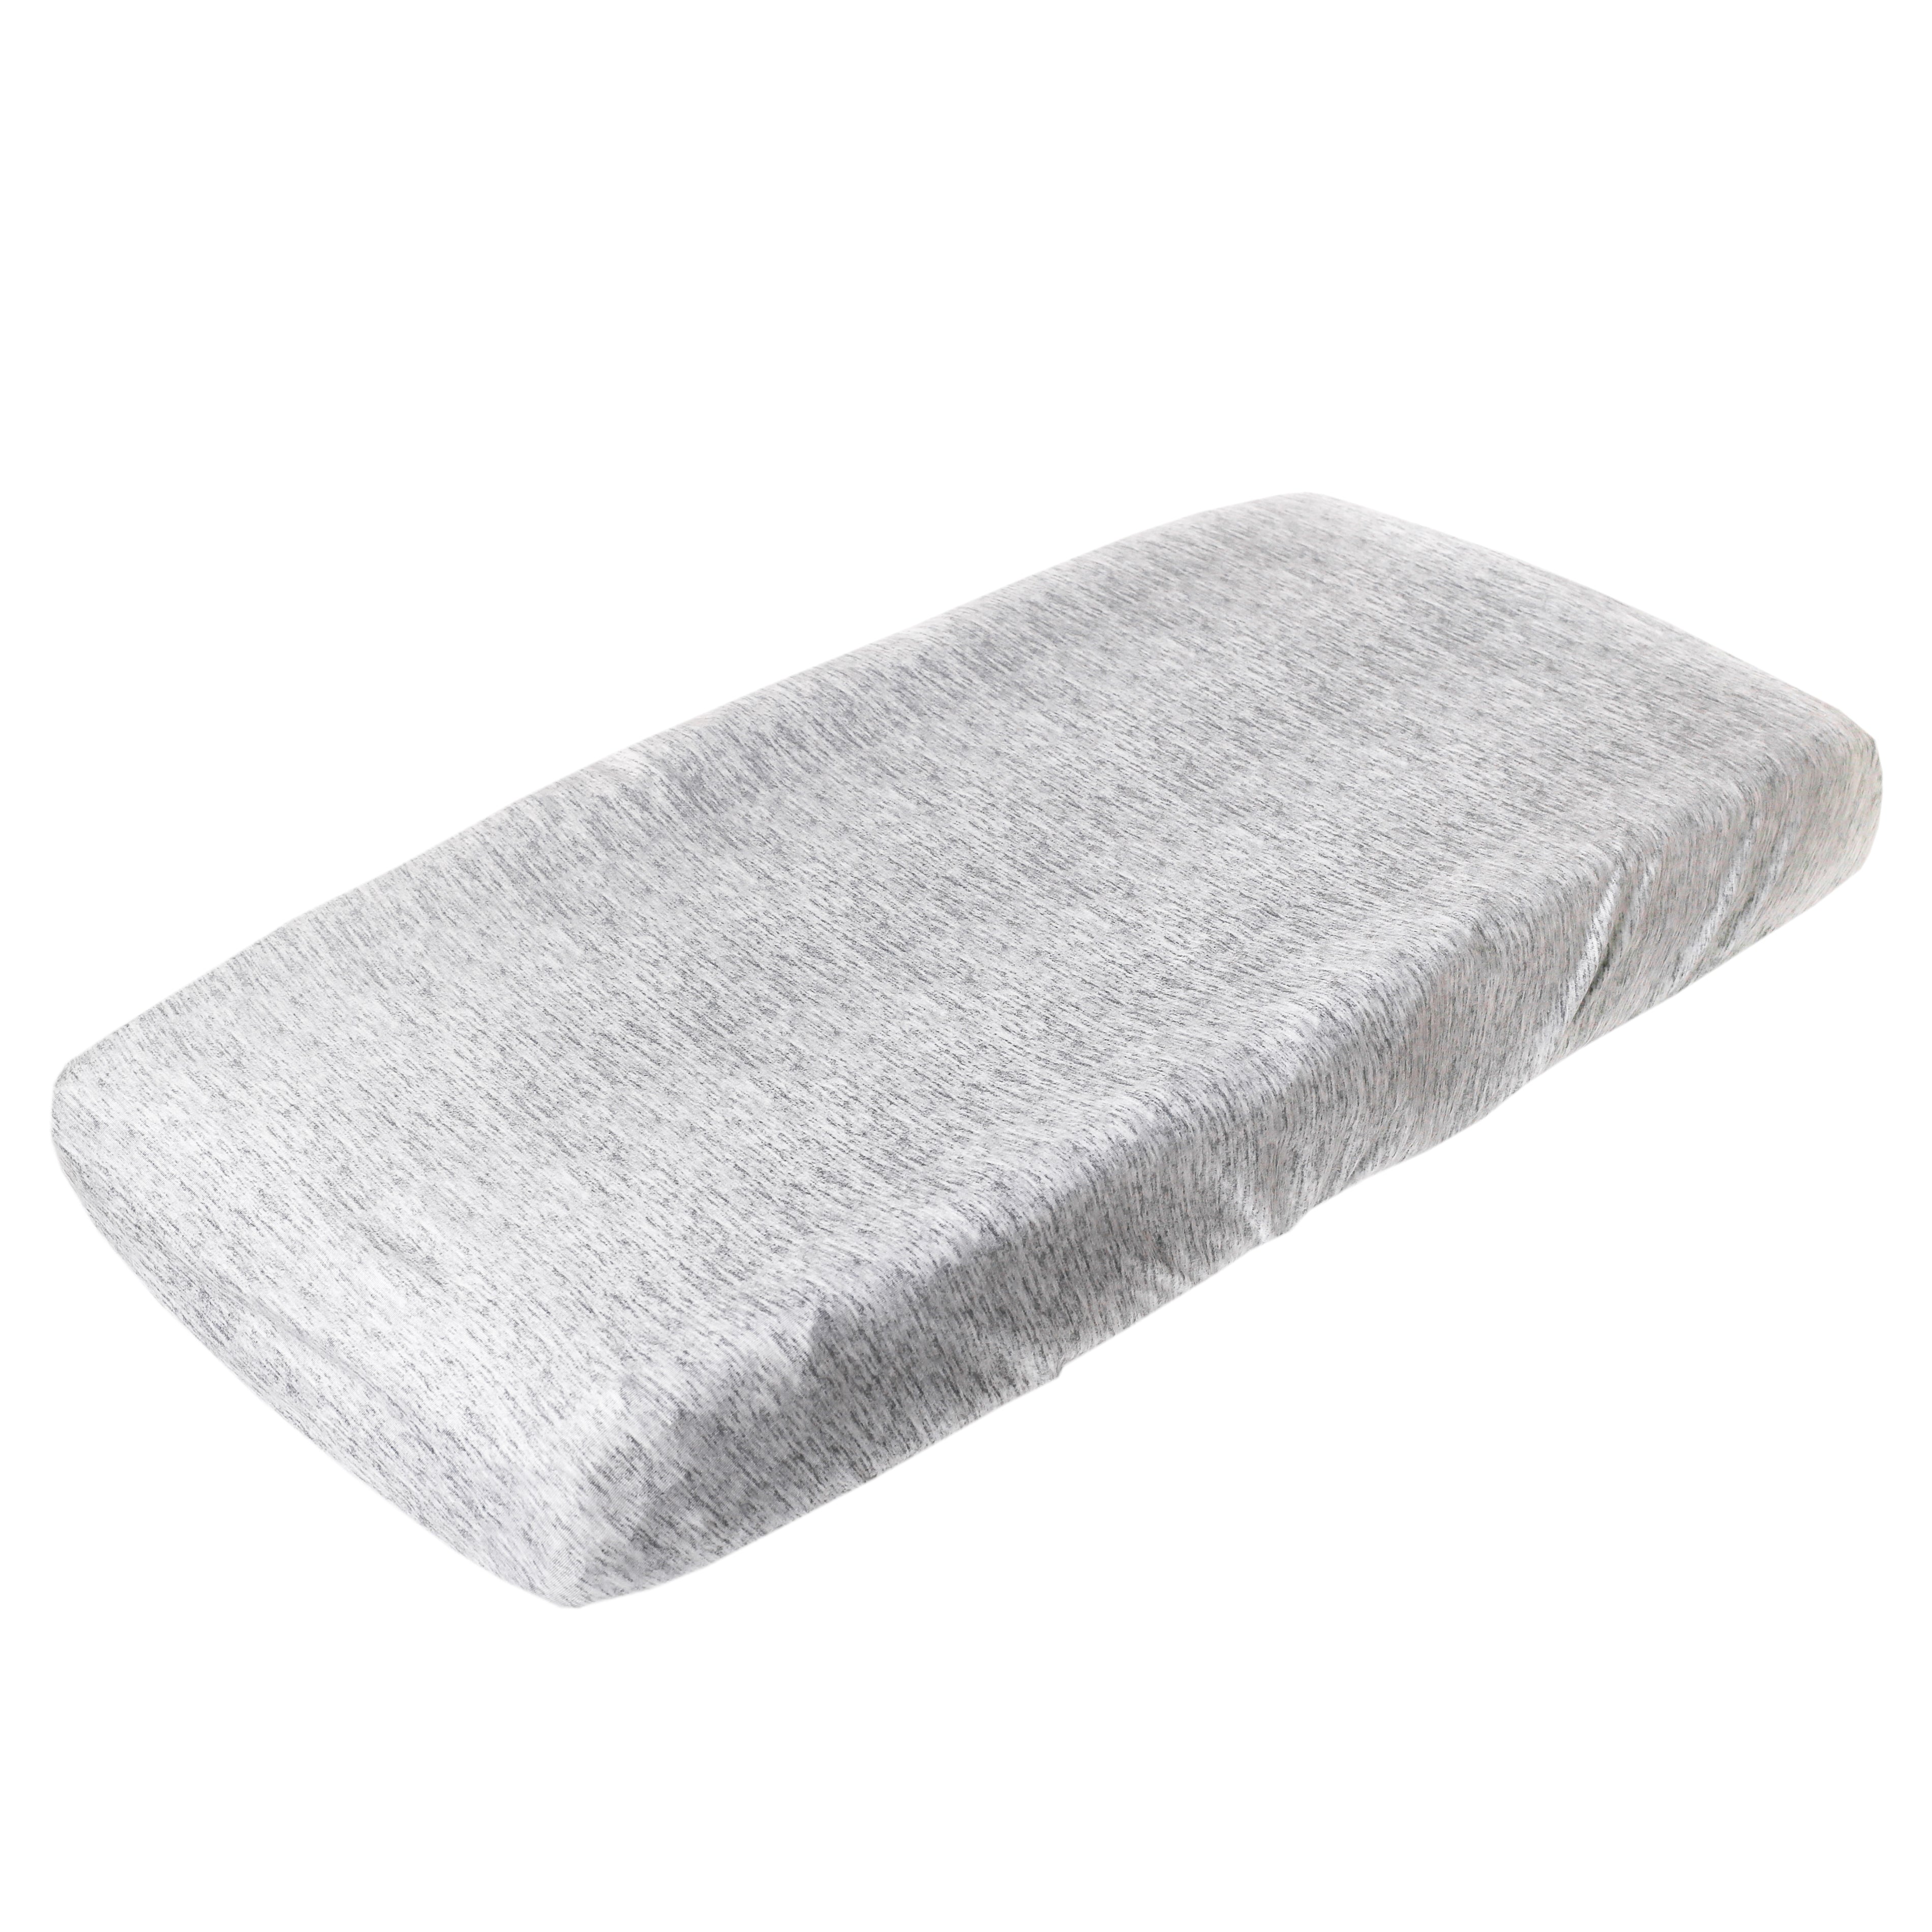 Premium Knit Diaper Changing Pad Cover - Asher